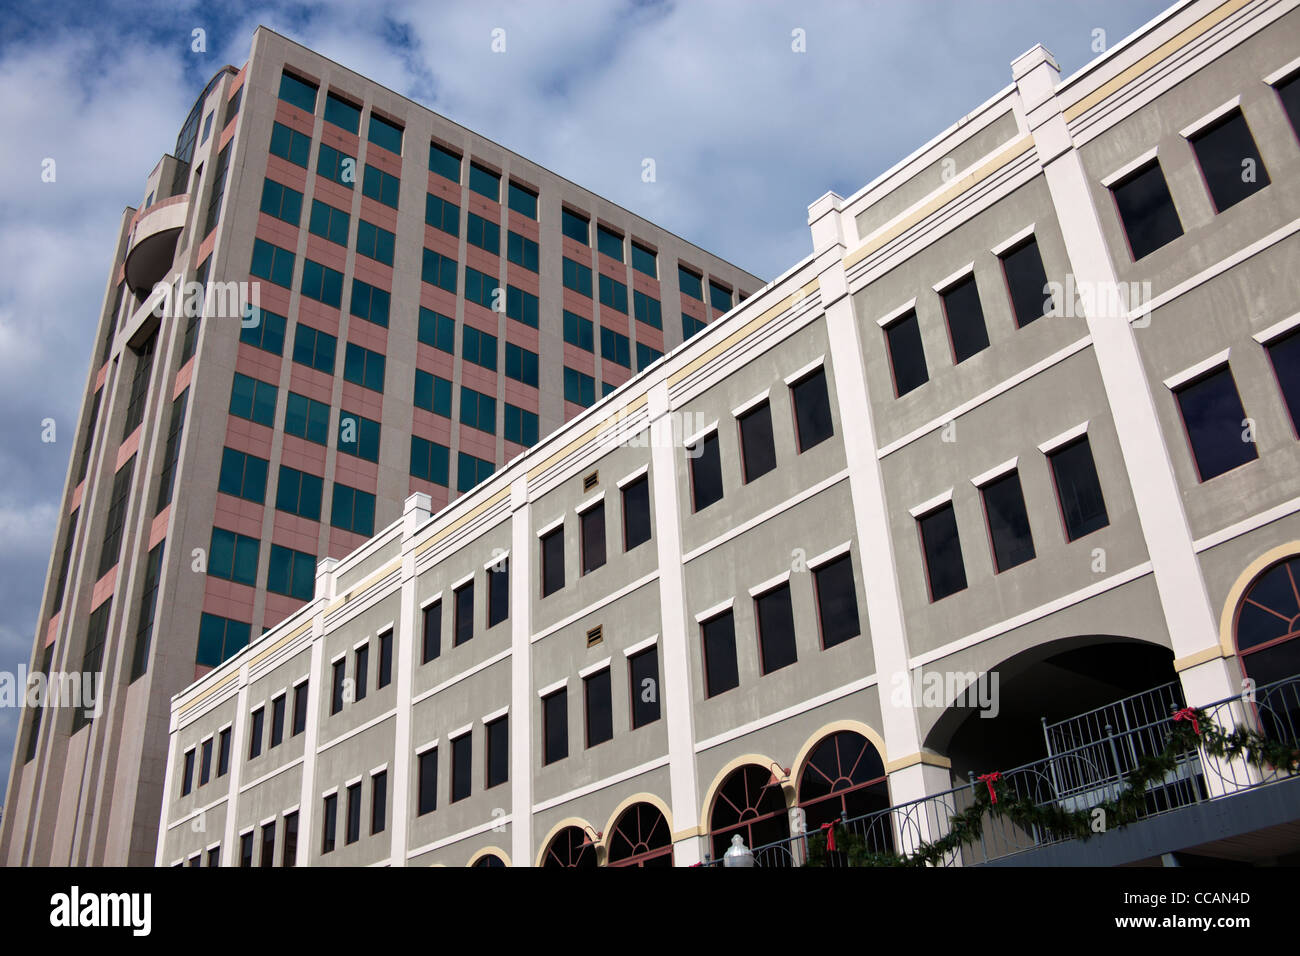 Architecture of downtown Tallahassee, Florida Stock Photo